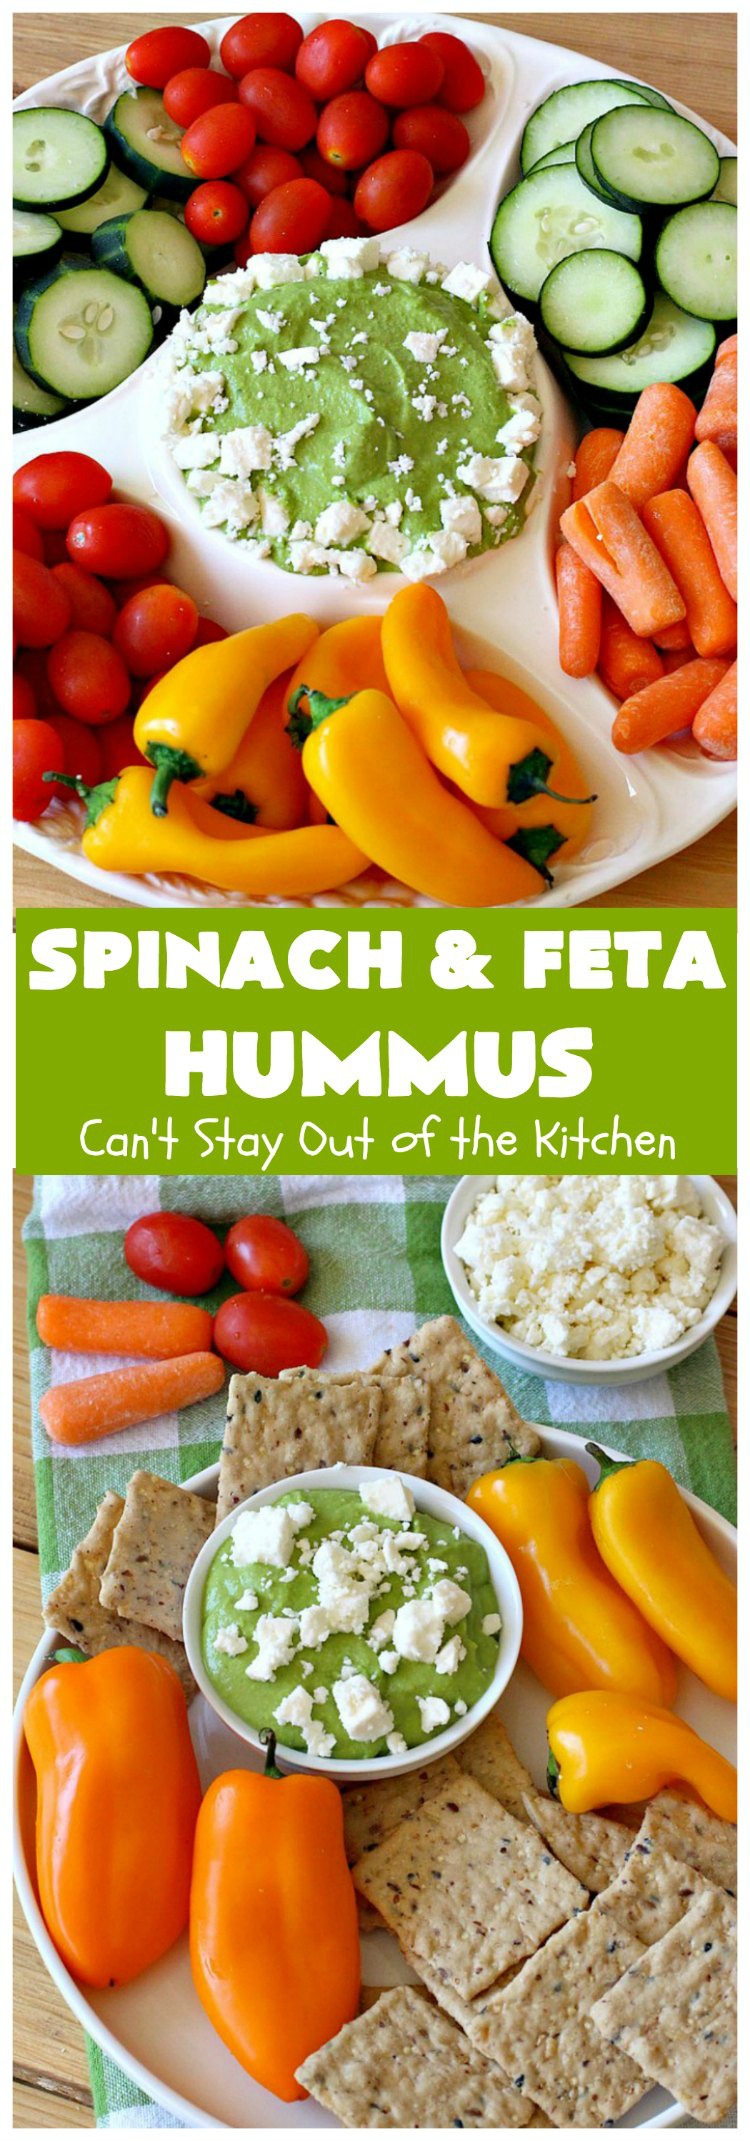 Spinach and Feta Hummus | Can't Stay Out of the Kitchen | this fantastic #hummus #recipe includes fresh #spinach, #FetaCheese, #GarbanzoBeans & some great spices that give it a little kick. Wonderful #appetizer for #holiday or #NewYearsDay parties or #Tailgating or #SuperBowl parties. Healthy, low calorie, #GlutenFree #SpinachFetaHummus